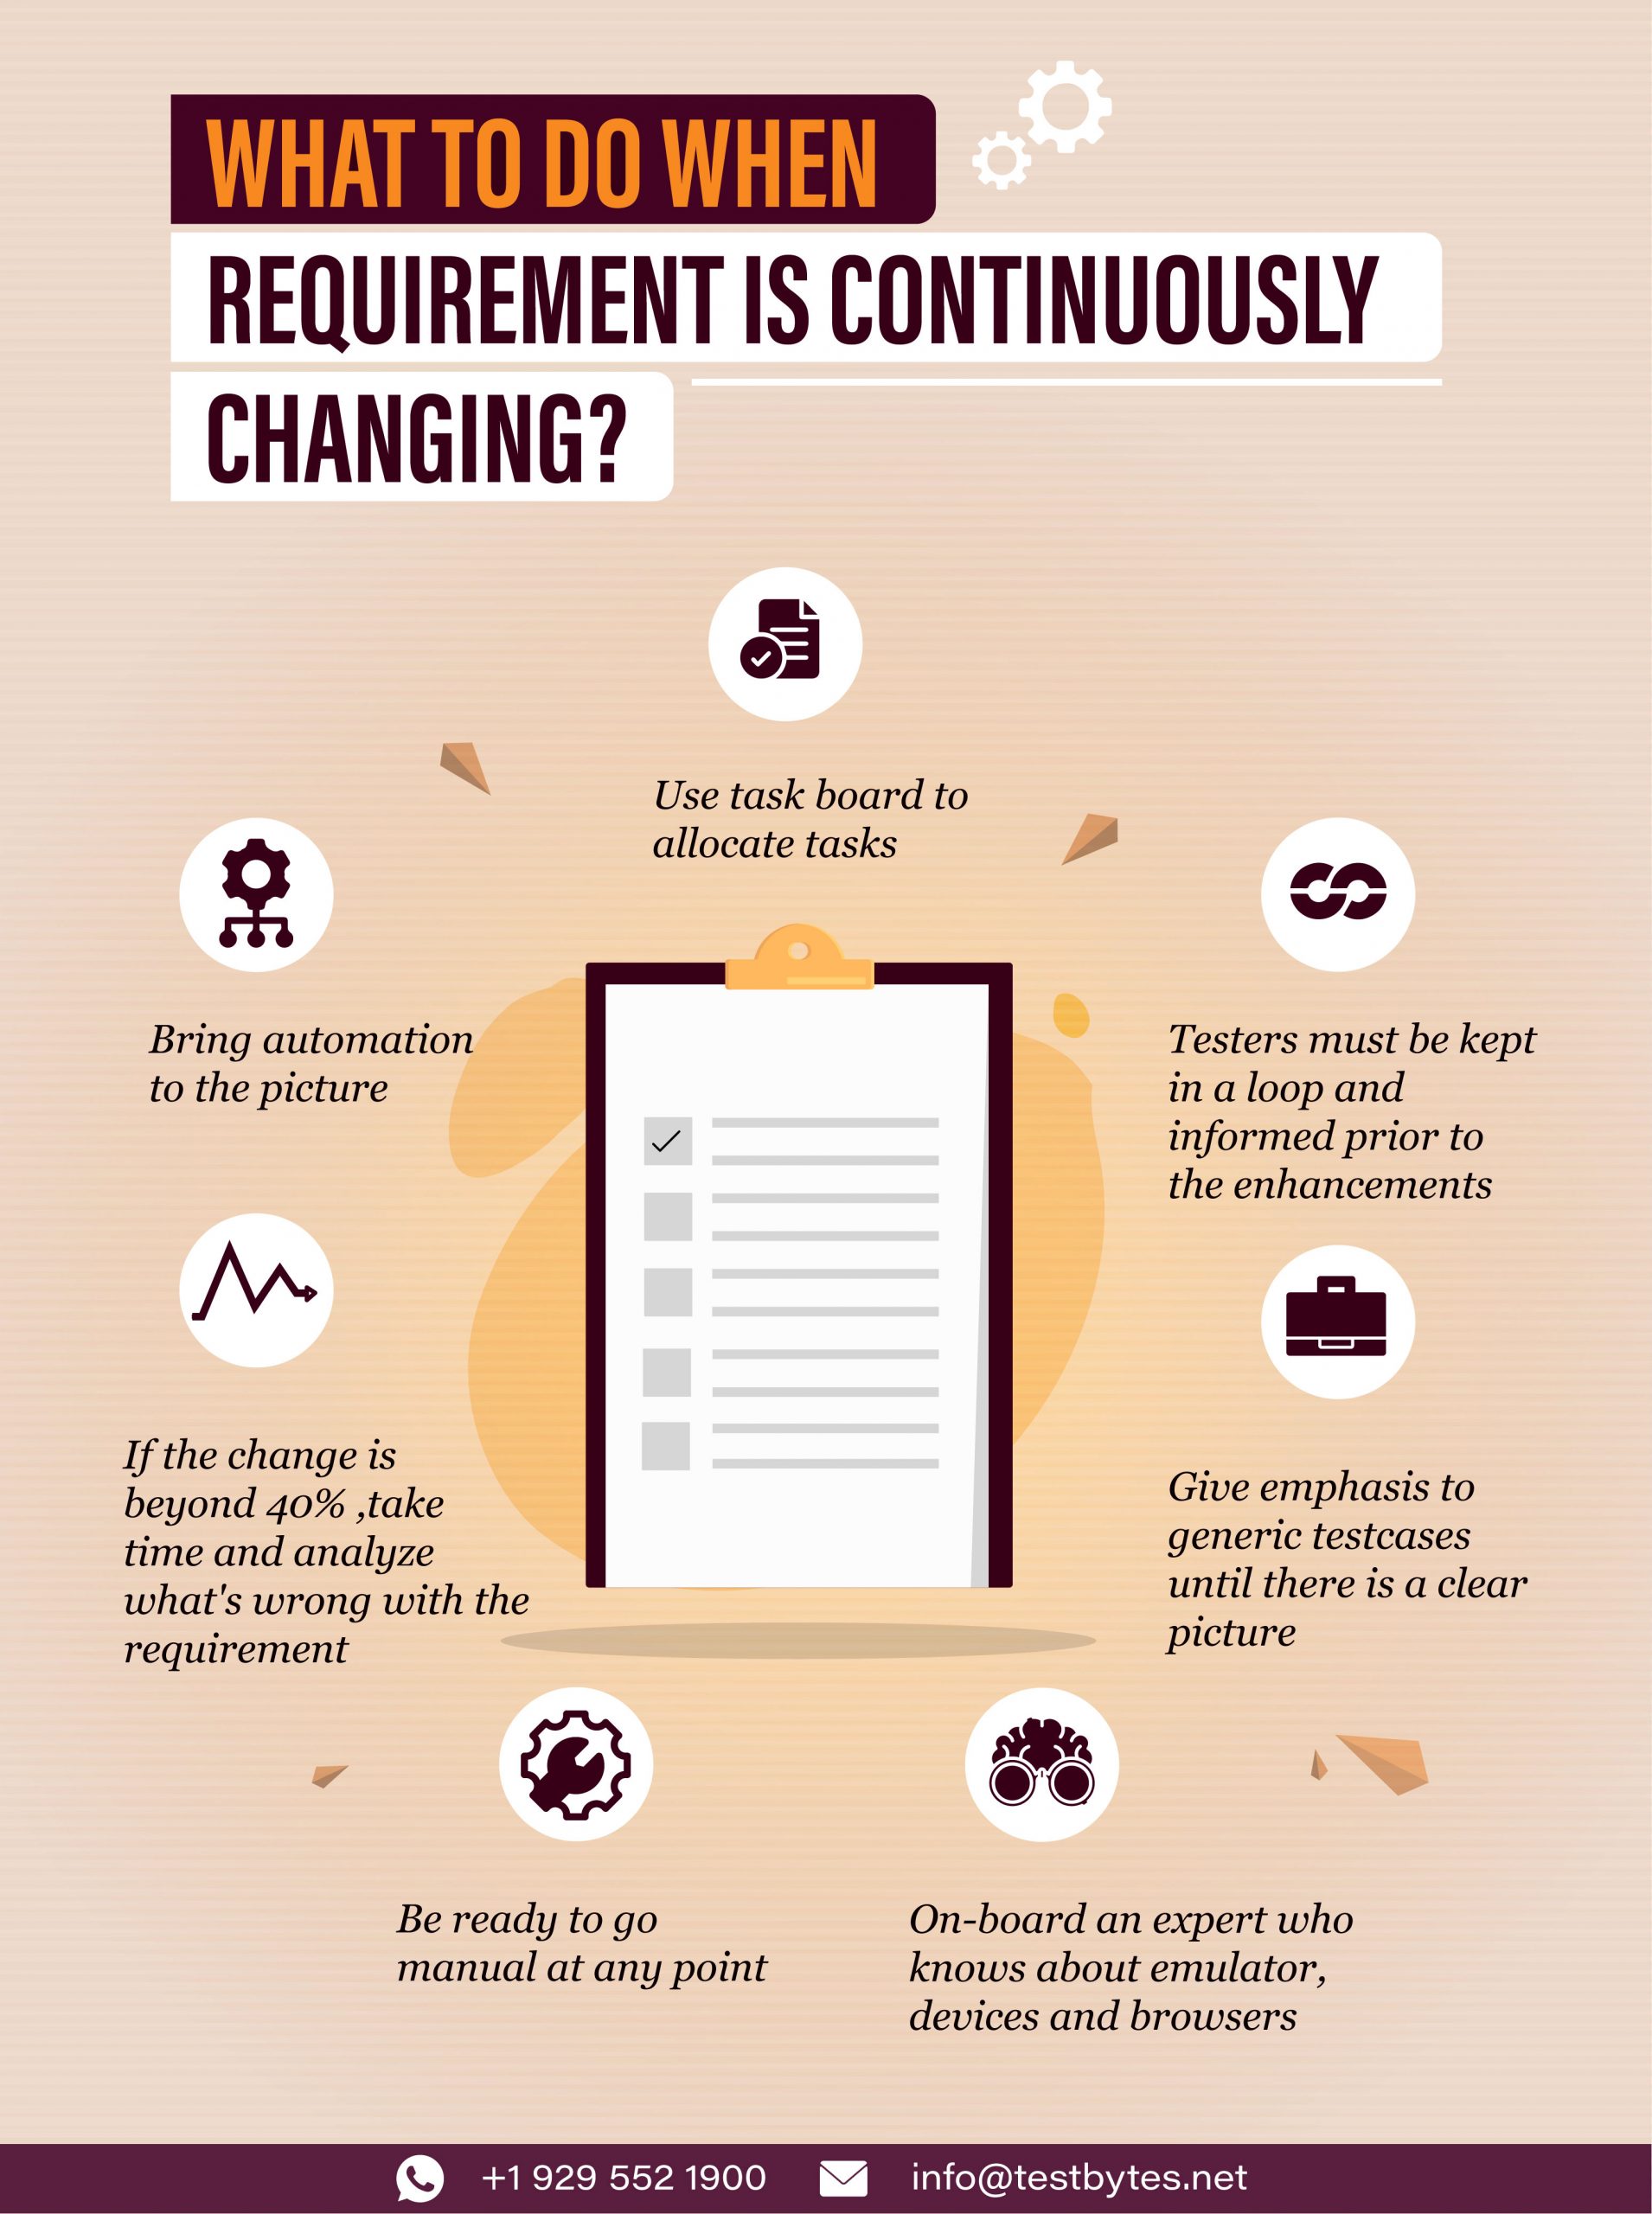 What to do when requirement is continuously changing